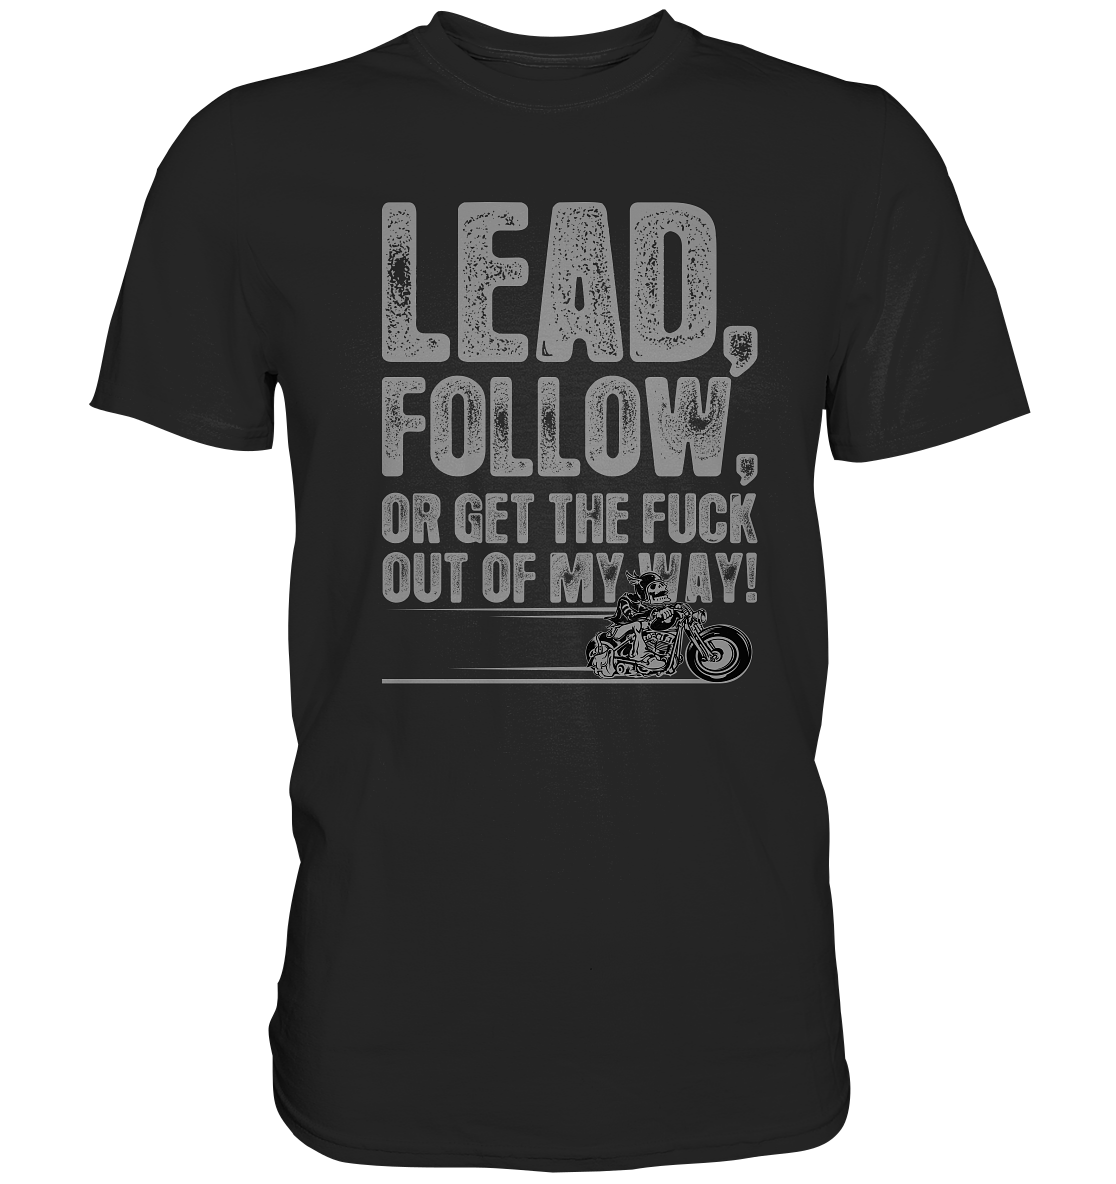 Lead, follow, or get the fuck out of my way - Premium unisex Shirt